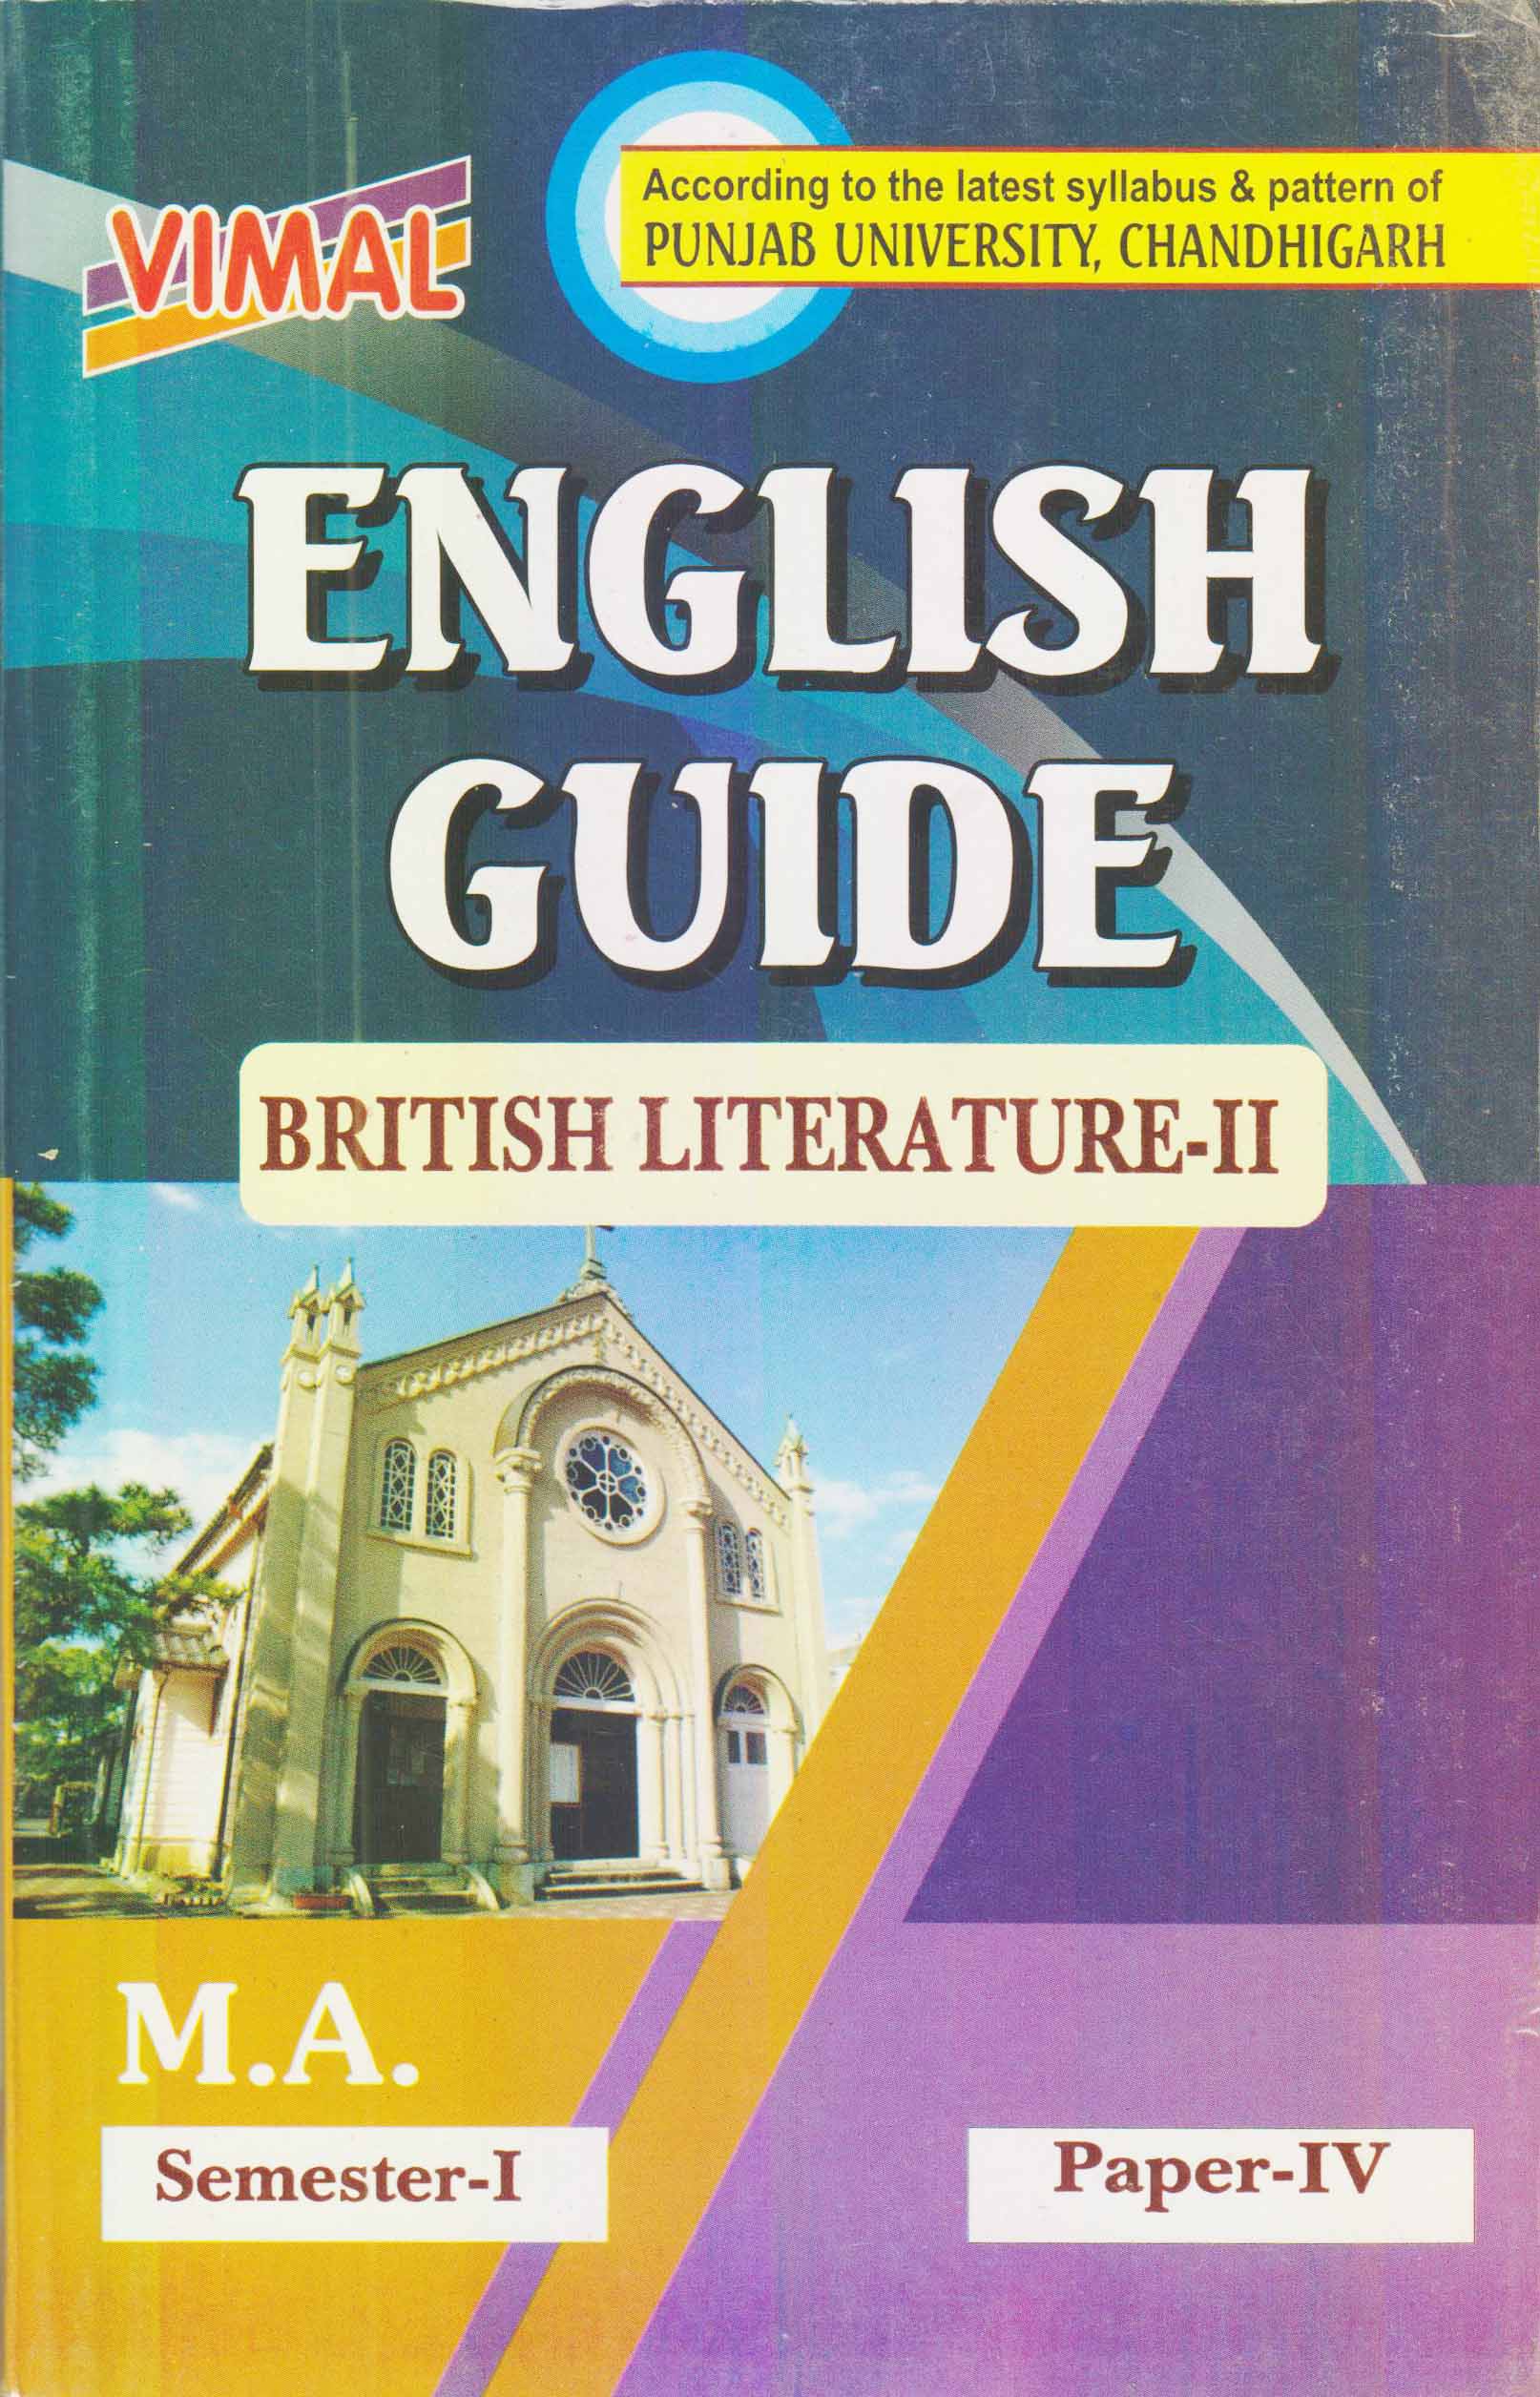 Vimal English Guide British Literature-II for M.A. Sem. 1, (Paper IV) New Edition